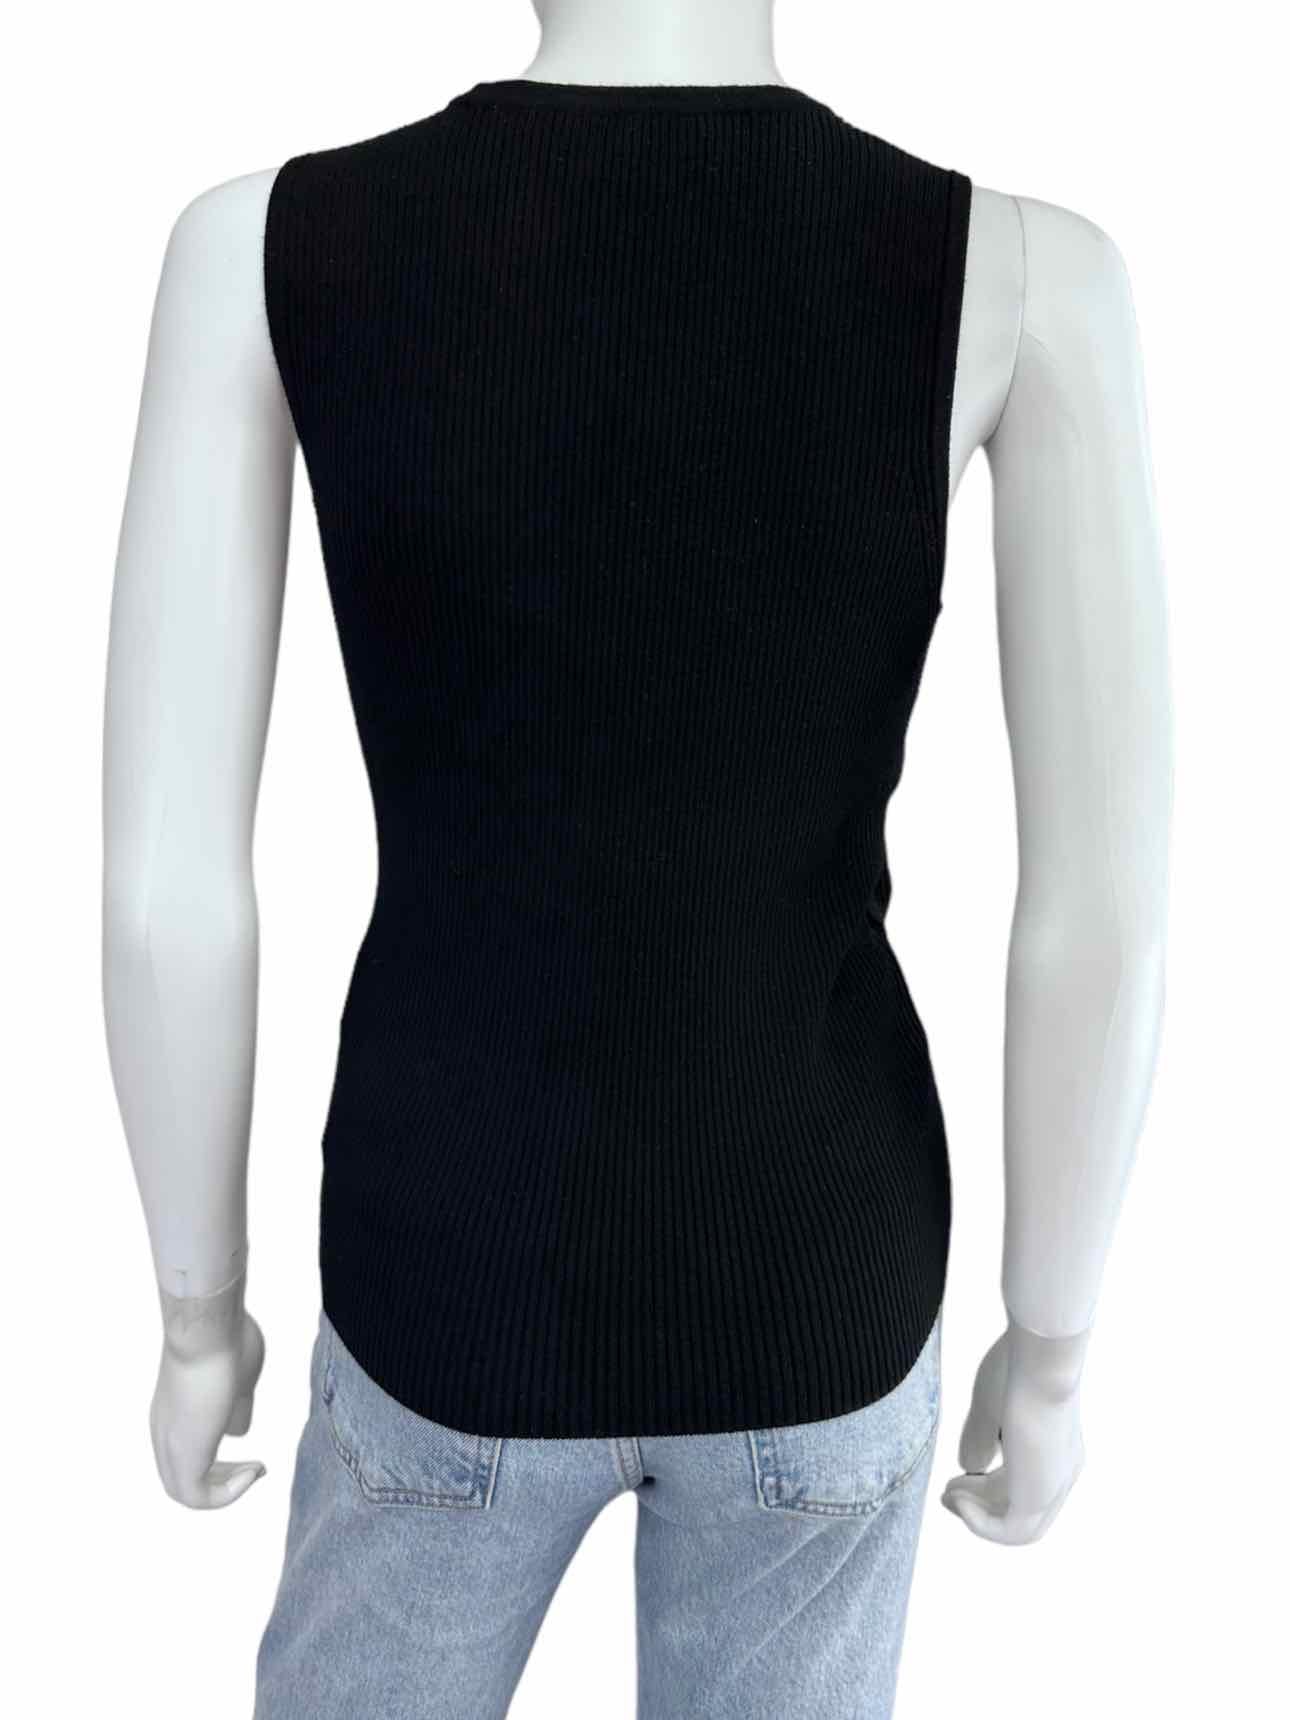 MILLY Black Sleeveless Sweater Size S